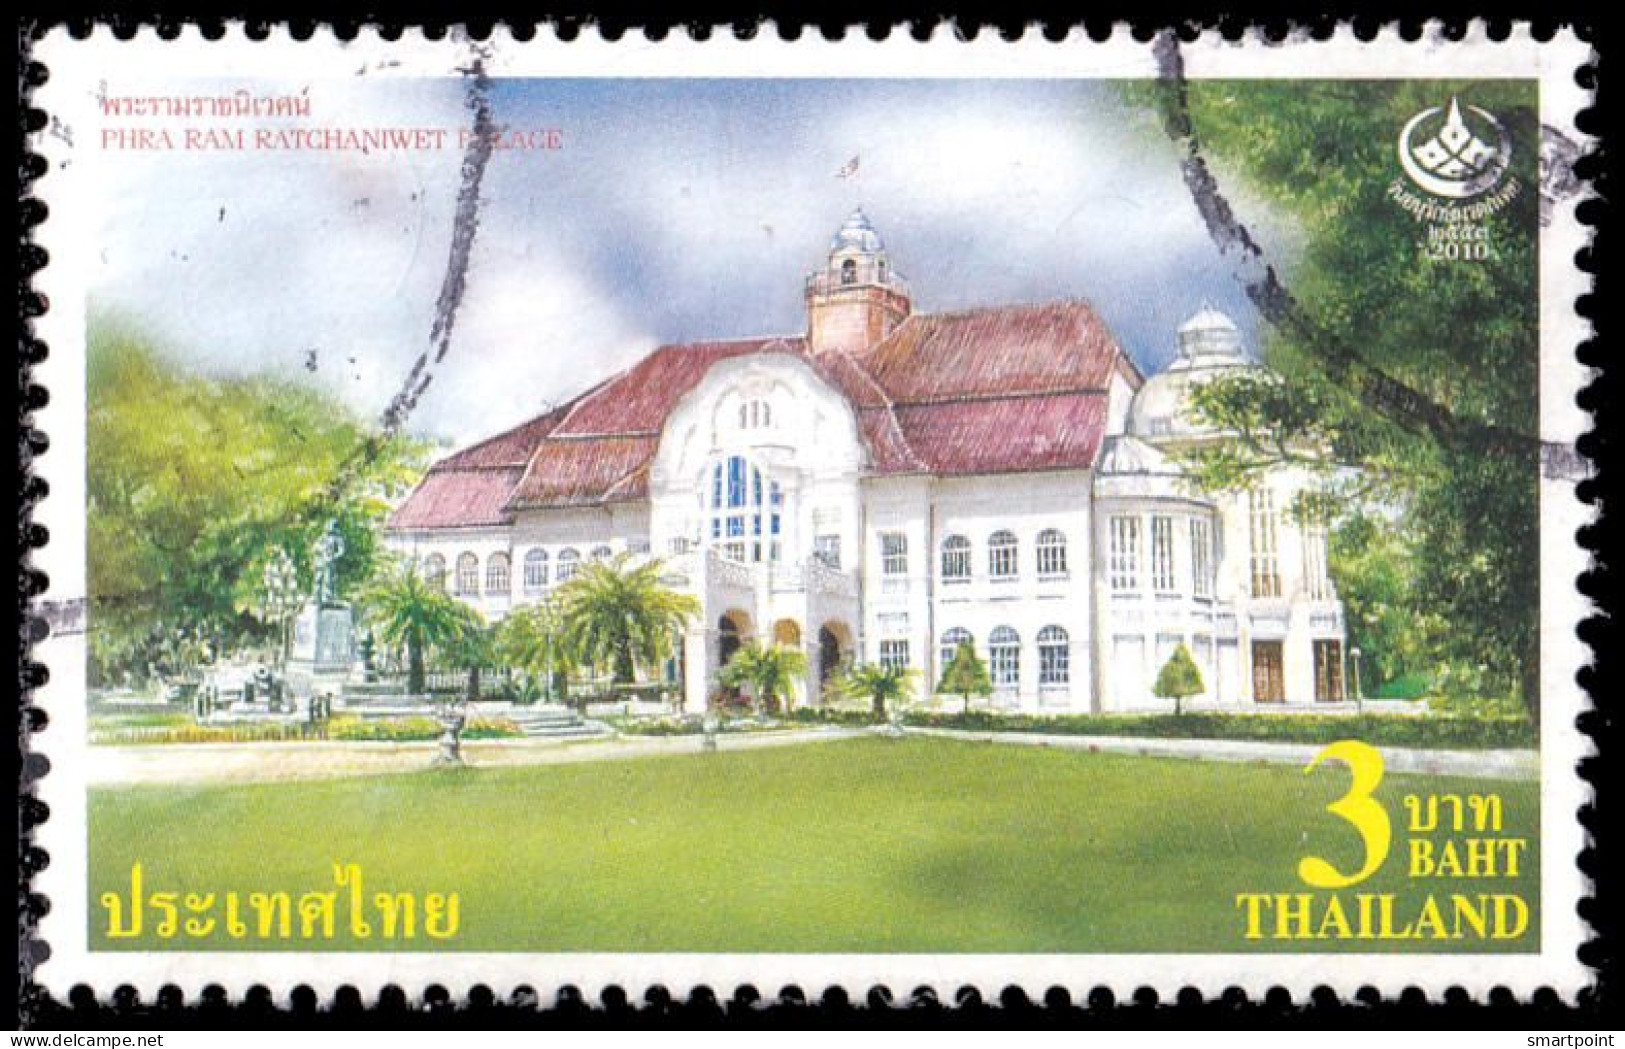 Thailand Stamp 2010 Thai Heritage Conservation Day 3 Baht - Used - Thailand